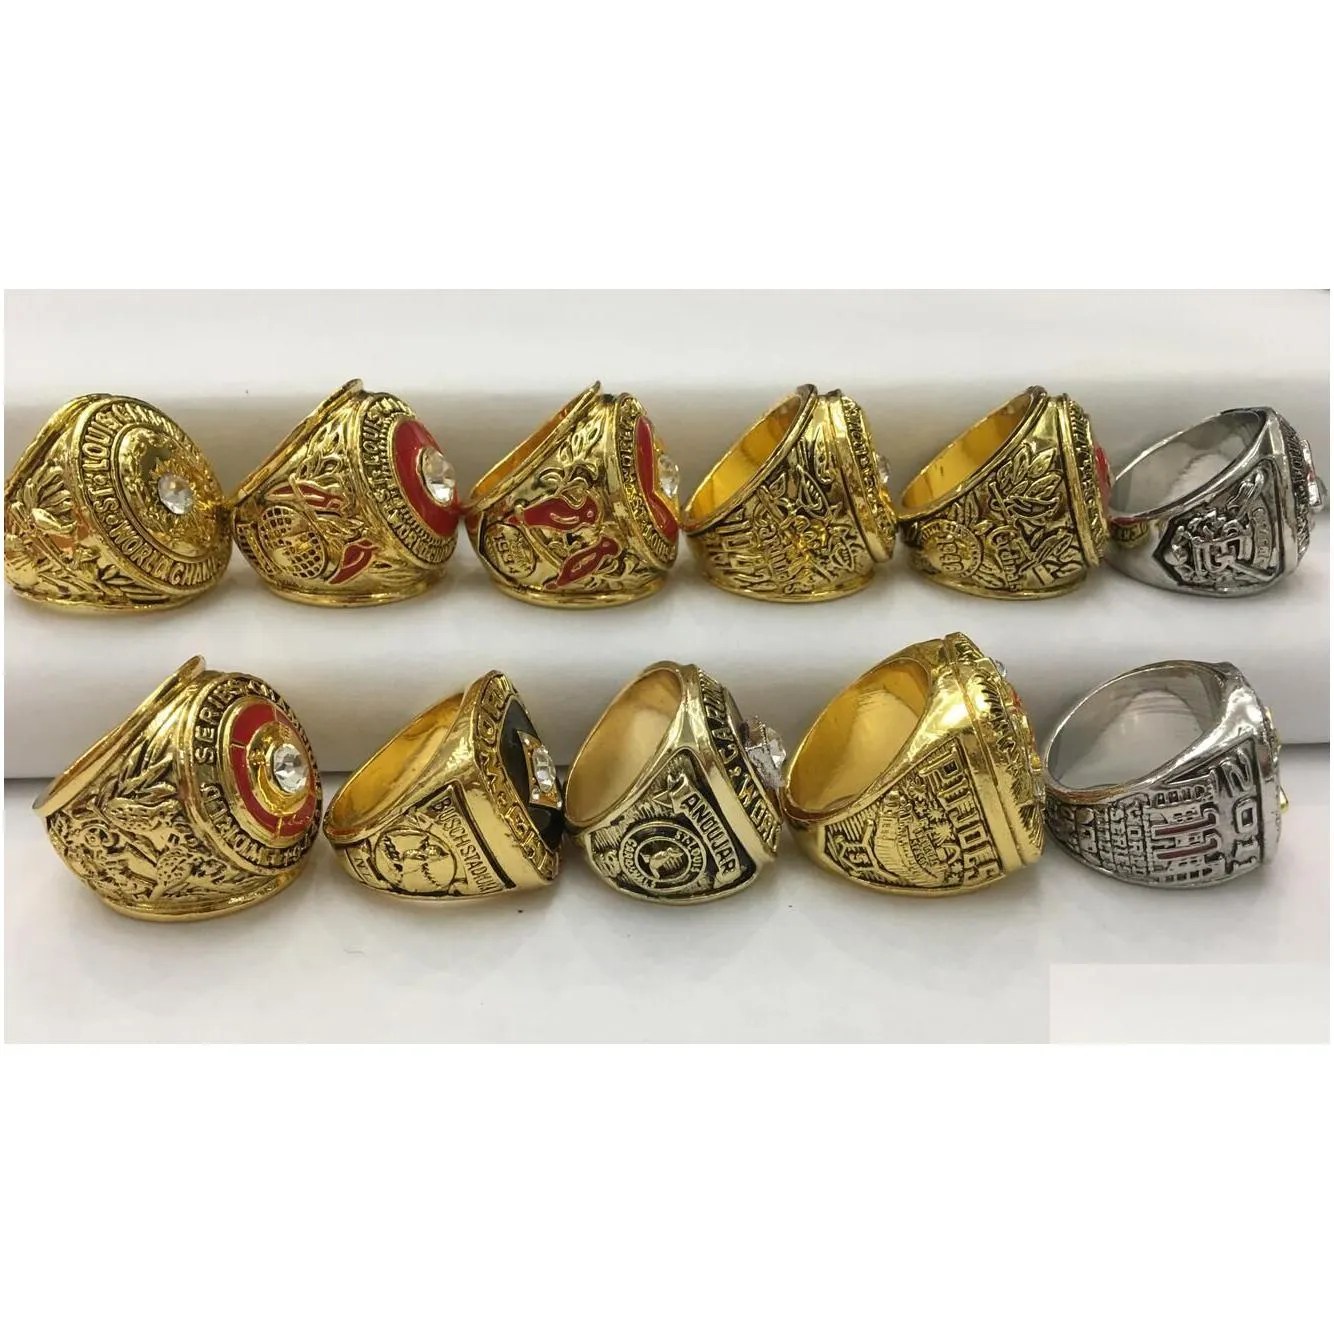 Cluster Rings 11Pcs Slc Baseball World Series Team Championship Ring Set With Wooden Display Box Souvenir Men Fan Gift Drop Wholesale Dhygd